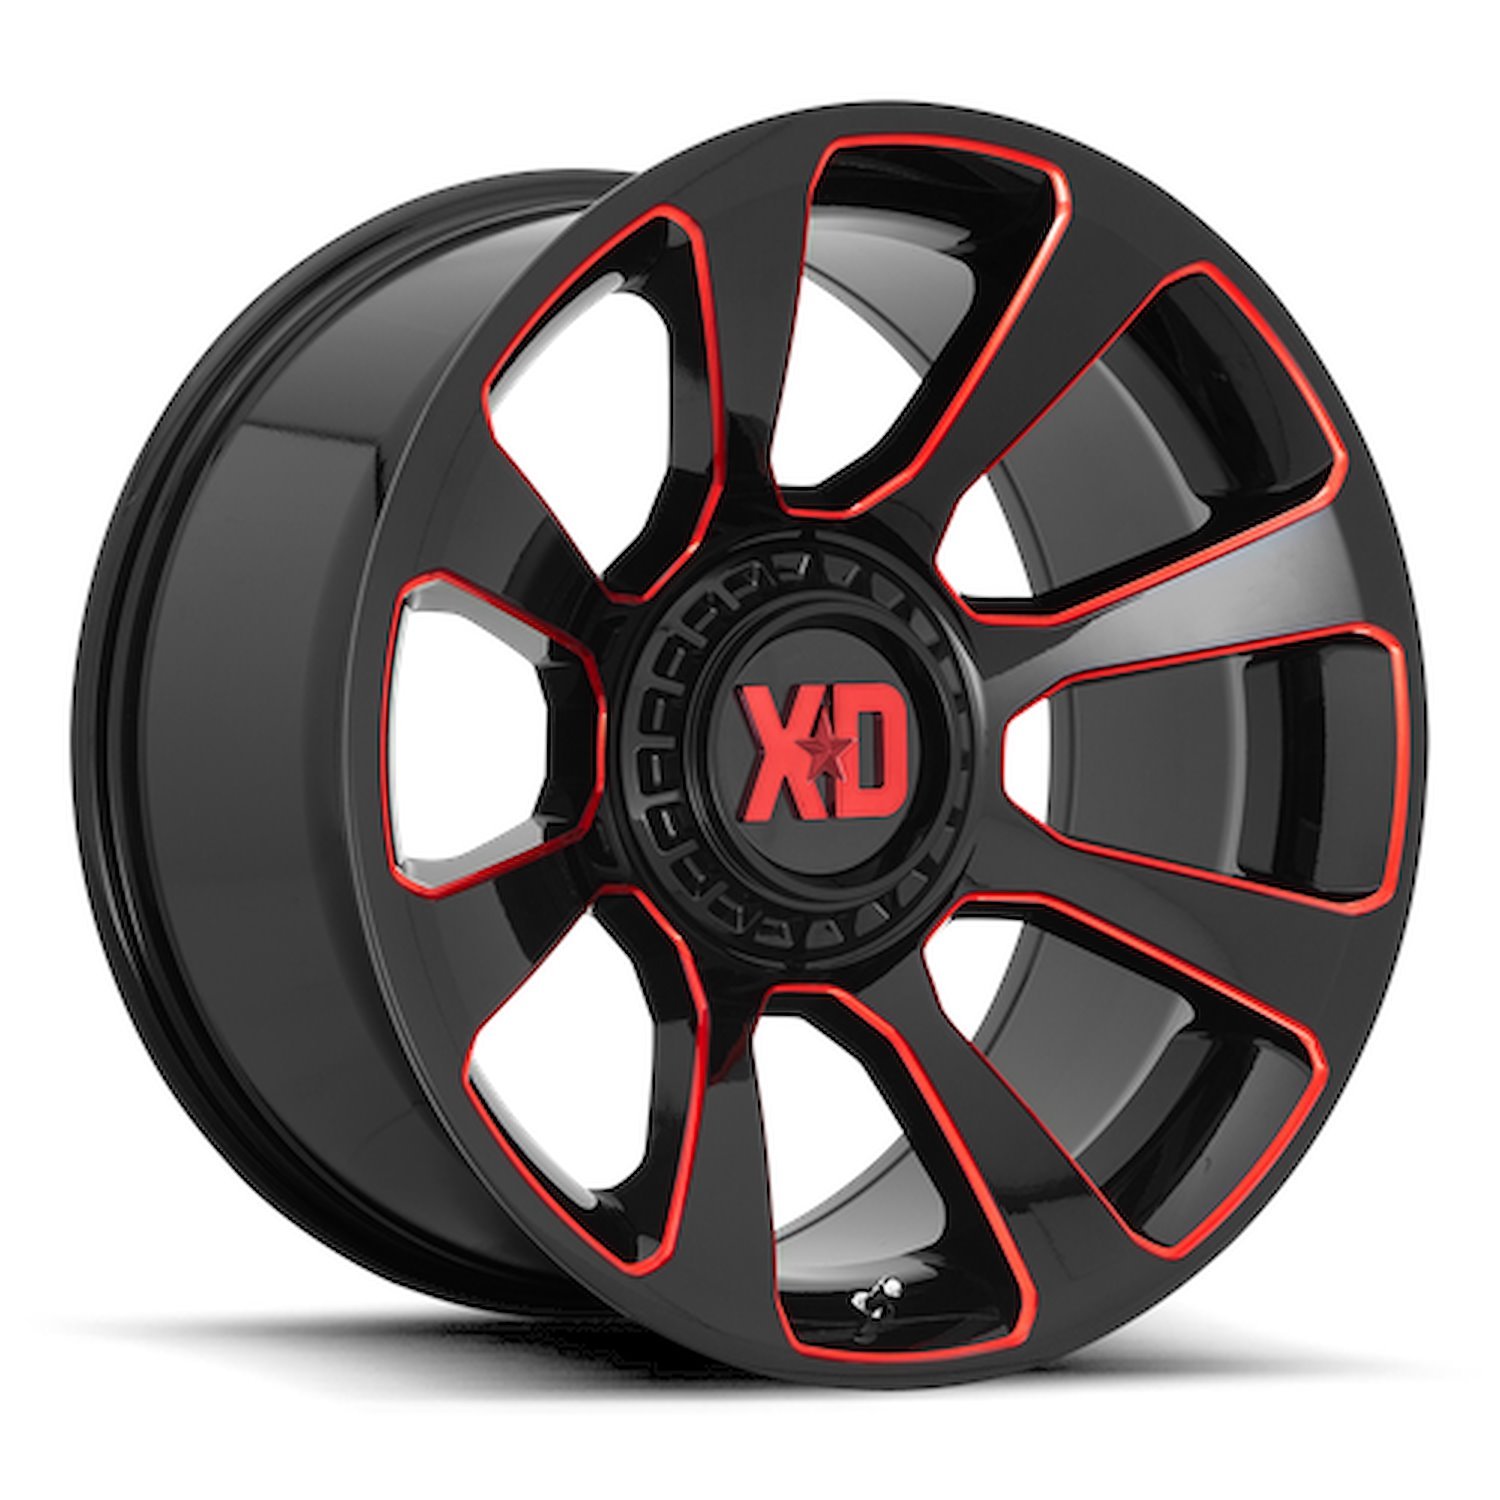 XD Wheels XD854 Reactor Wheel [Size: 20" x 10"] Gloss Black w/ Milled Red Accents